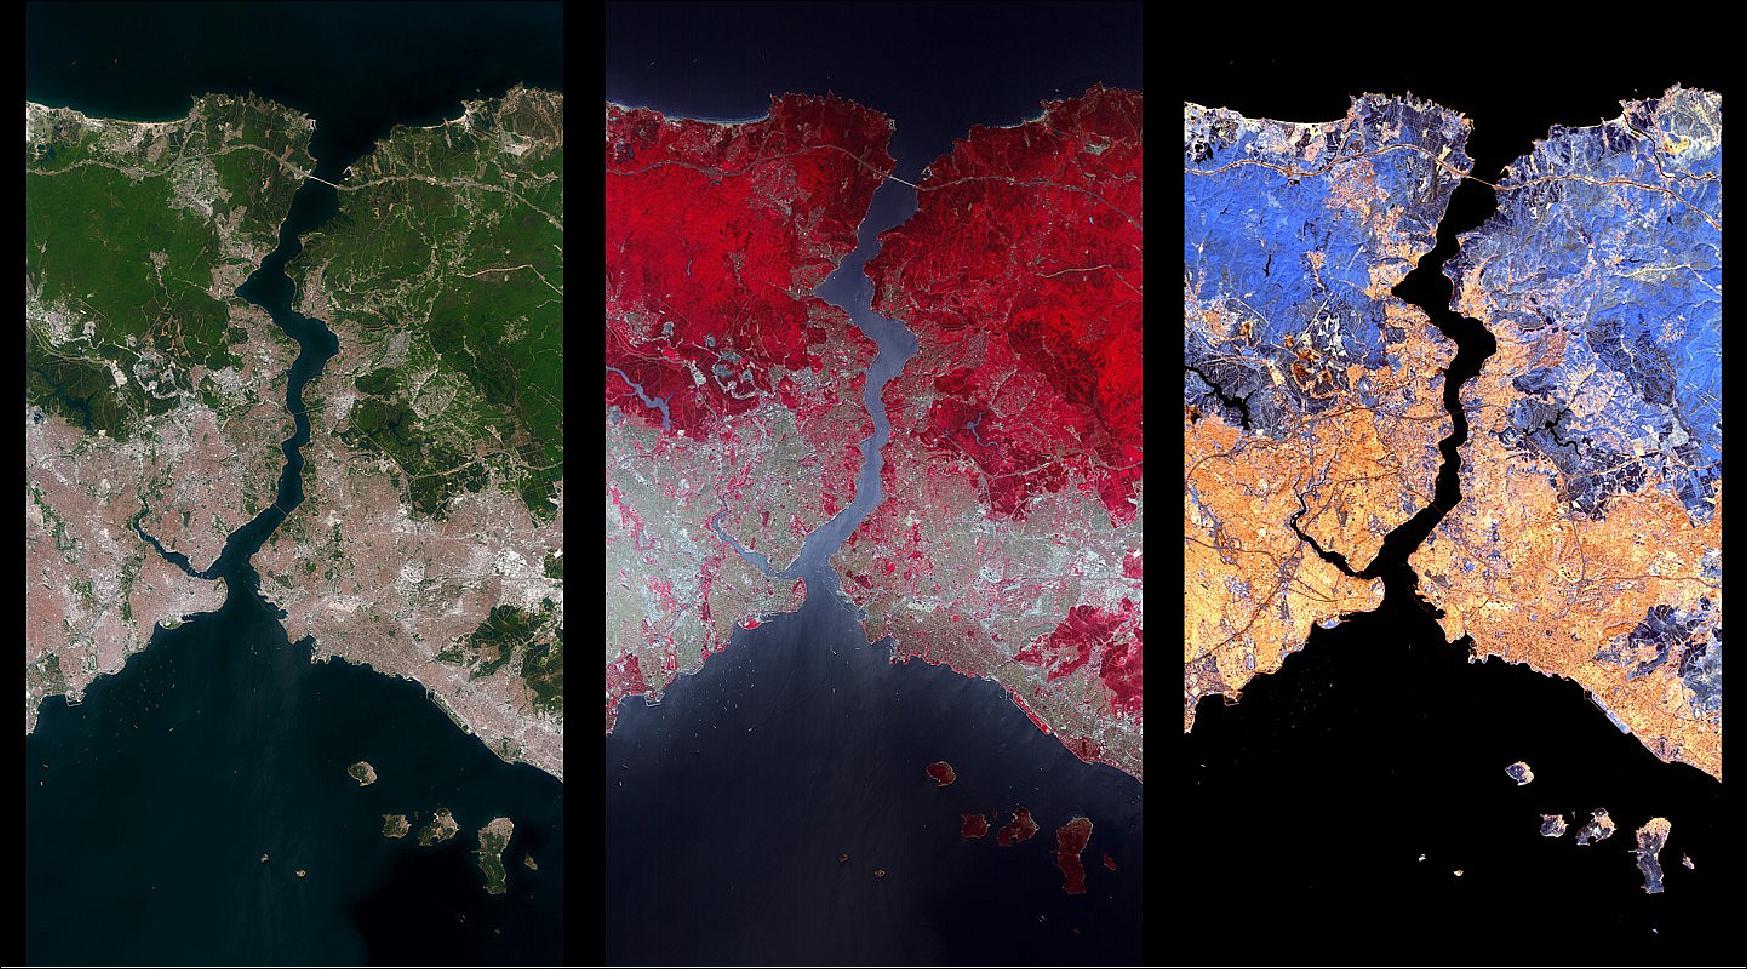 Figure 17: EnMAP- one image many different information contents (image 1/3). Four weeks after its launch, EnMAP has now sent home the first images from space. They show a strip about 30 km wide and 180 km long over Istanbul on the Bosporus in Turkey. The data were sent to Earth via the DLR ground station in Neustrelitz. In another five months, the mission is scheduled to enter the operational phase. Then scientists can start collecting data on specific areas of the Earth [image credit: DLR (CC BY-NC-ND 3.0)]